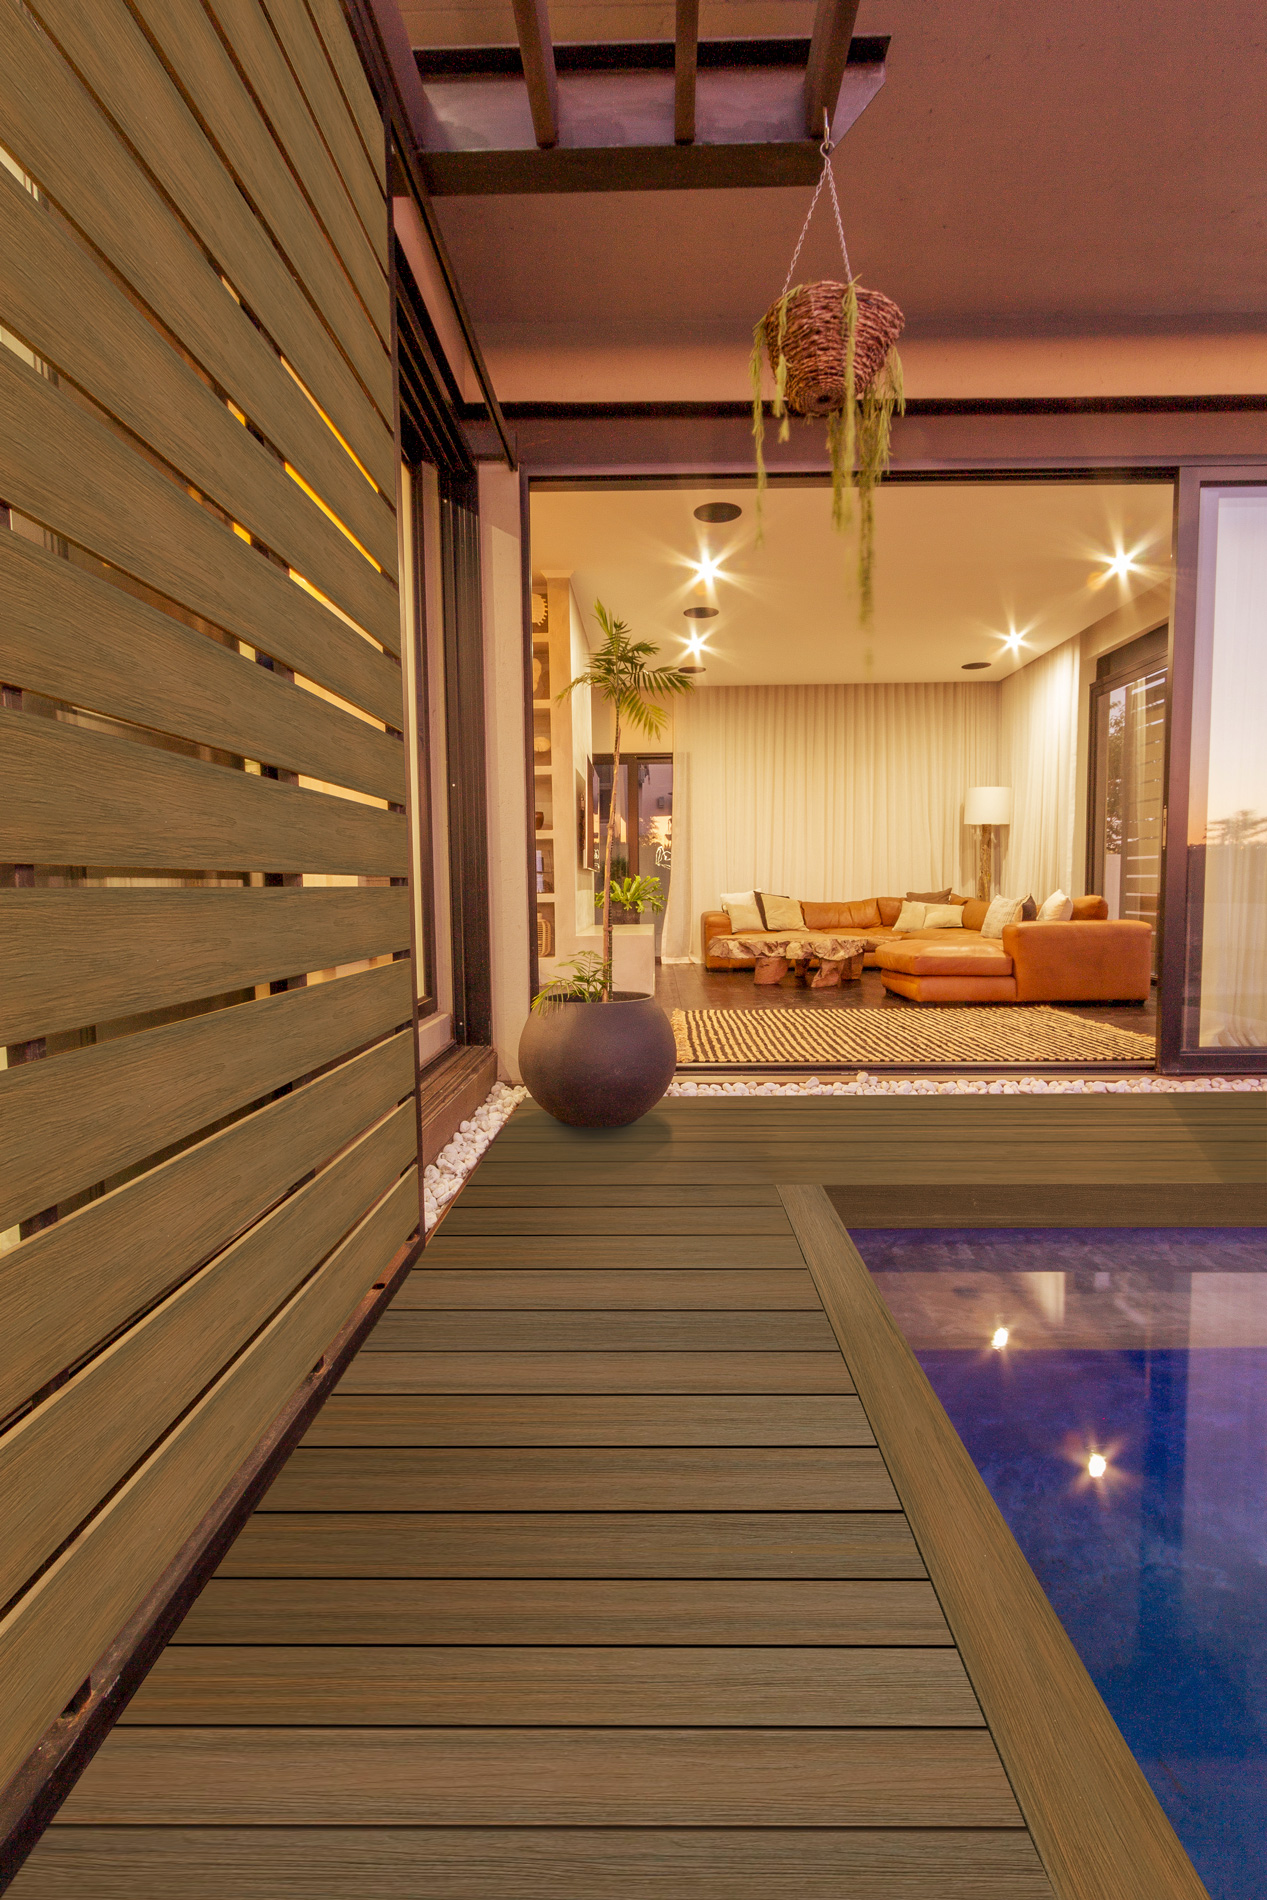 Composite boards are used as poolside decking and privacy cladding.